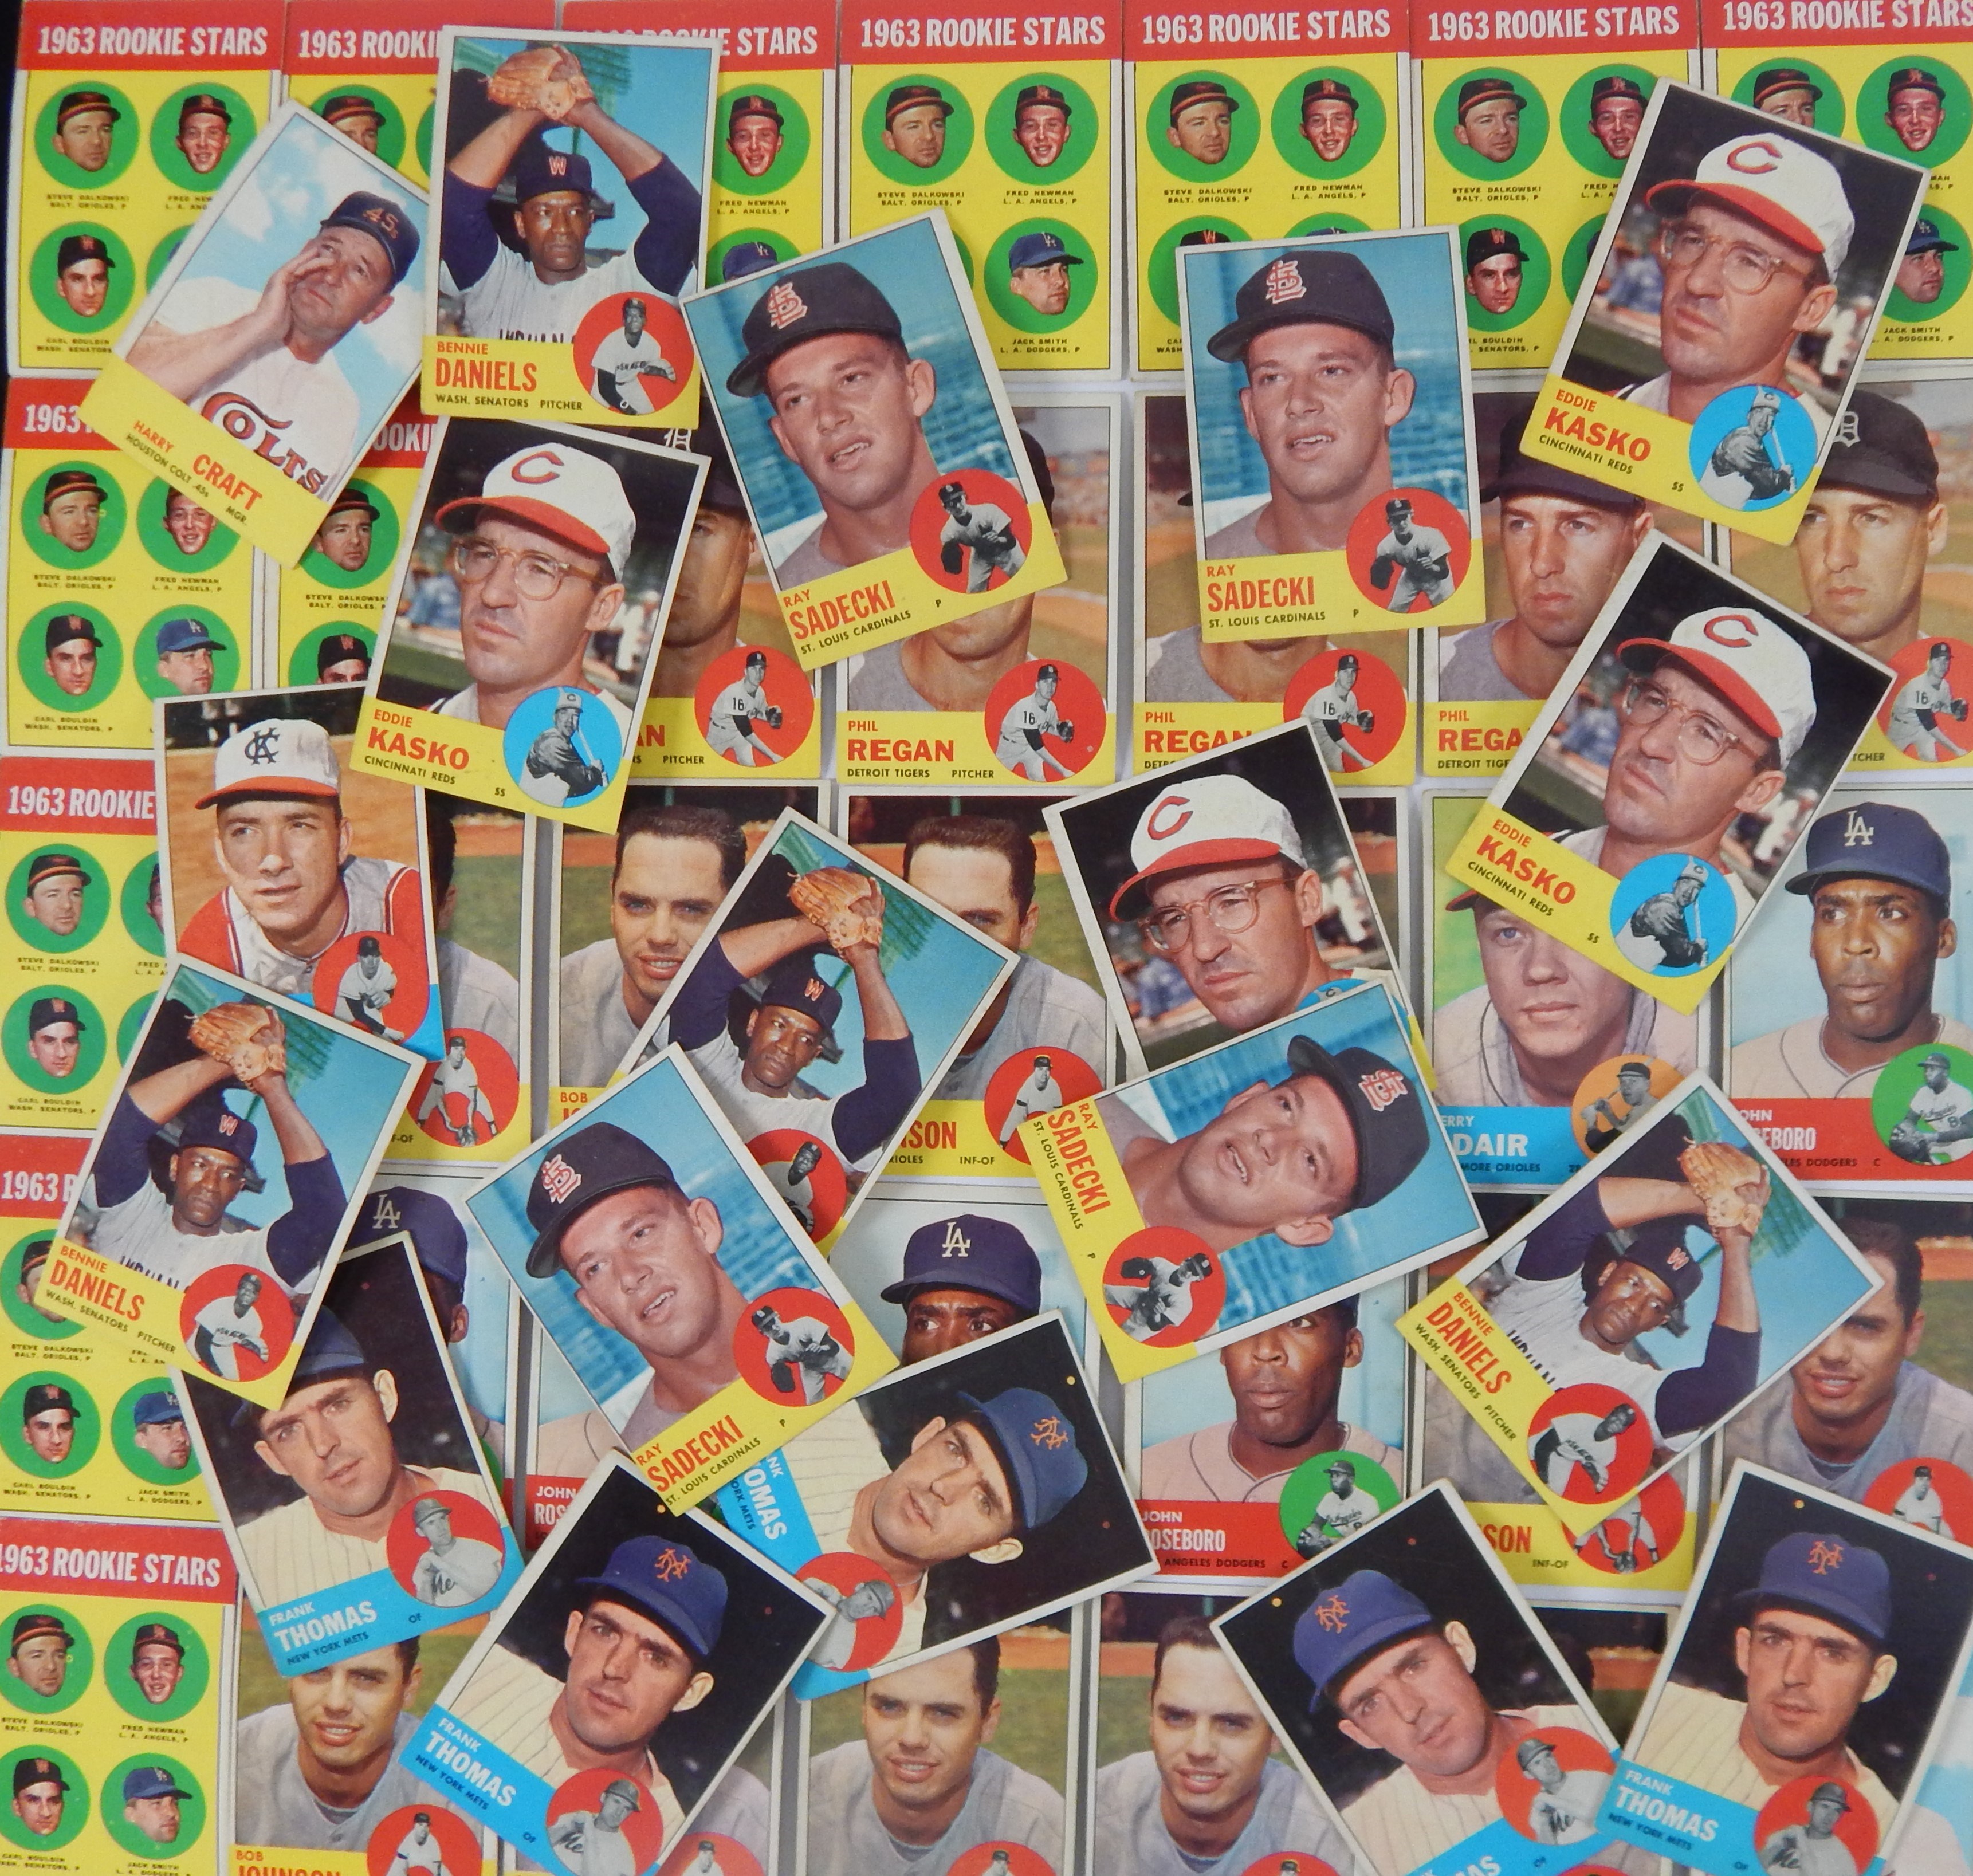 Baseball and Trading Cards - 1963 Topps Find of 93 Cards with Huge Duplication